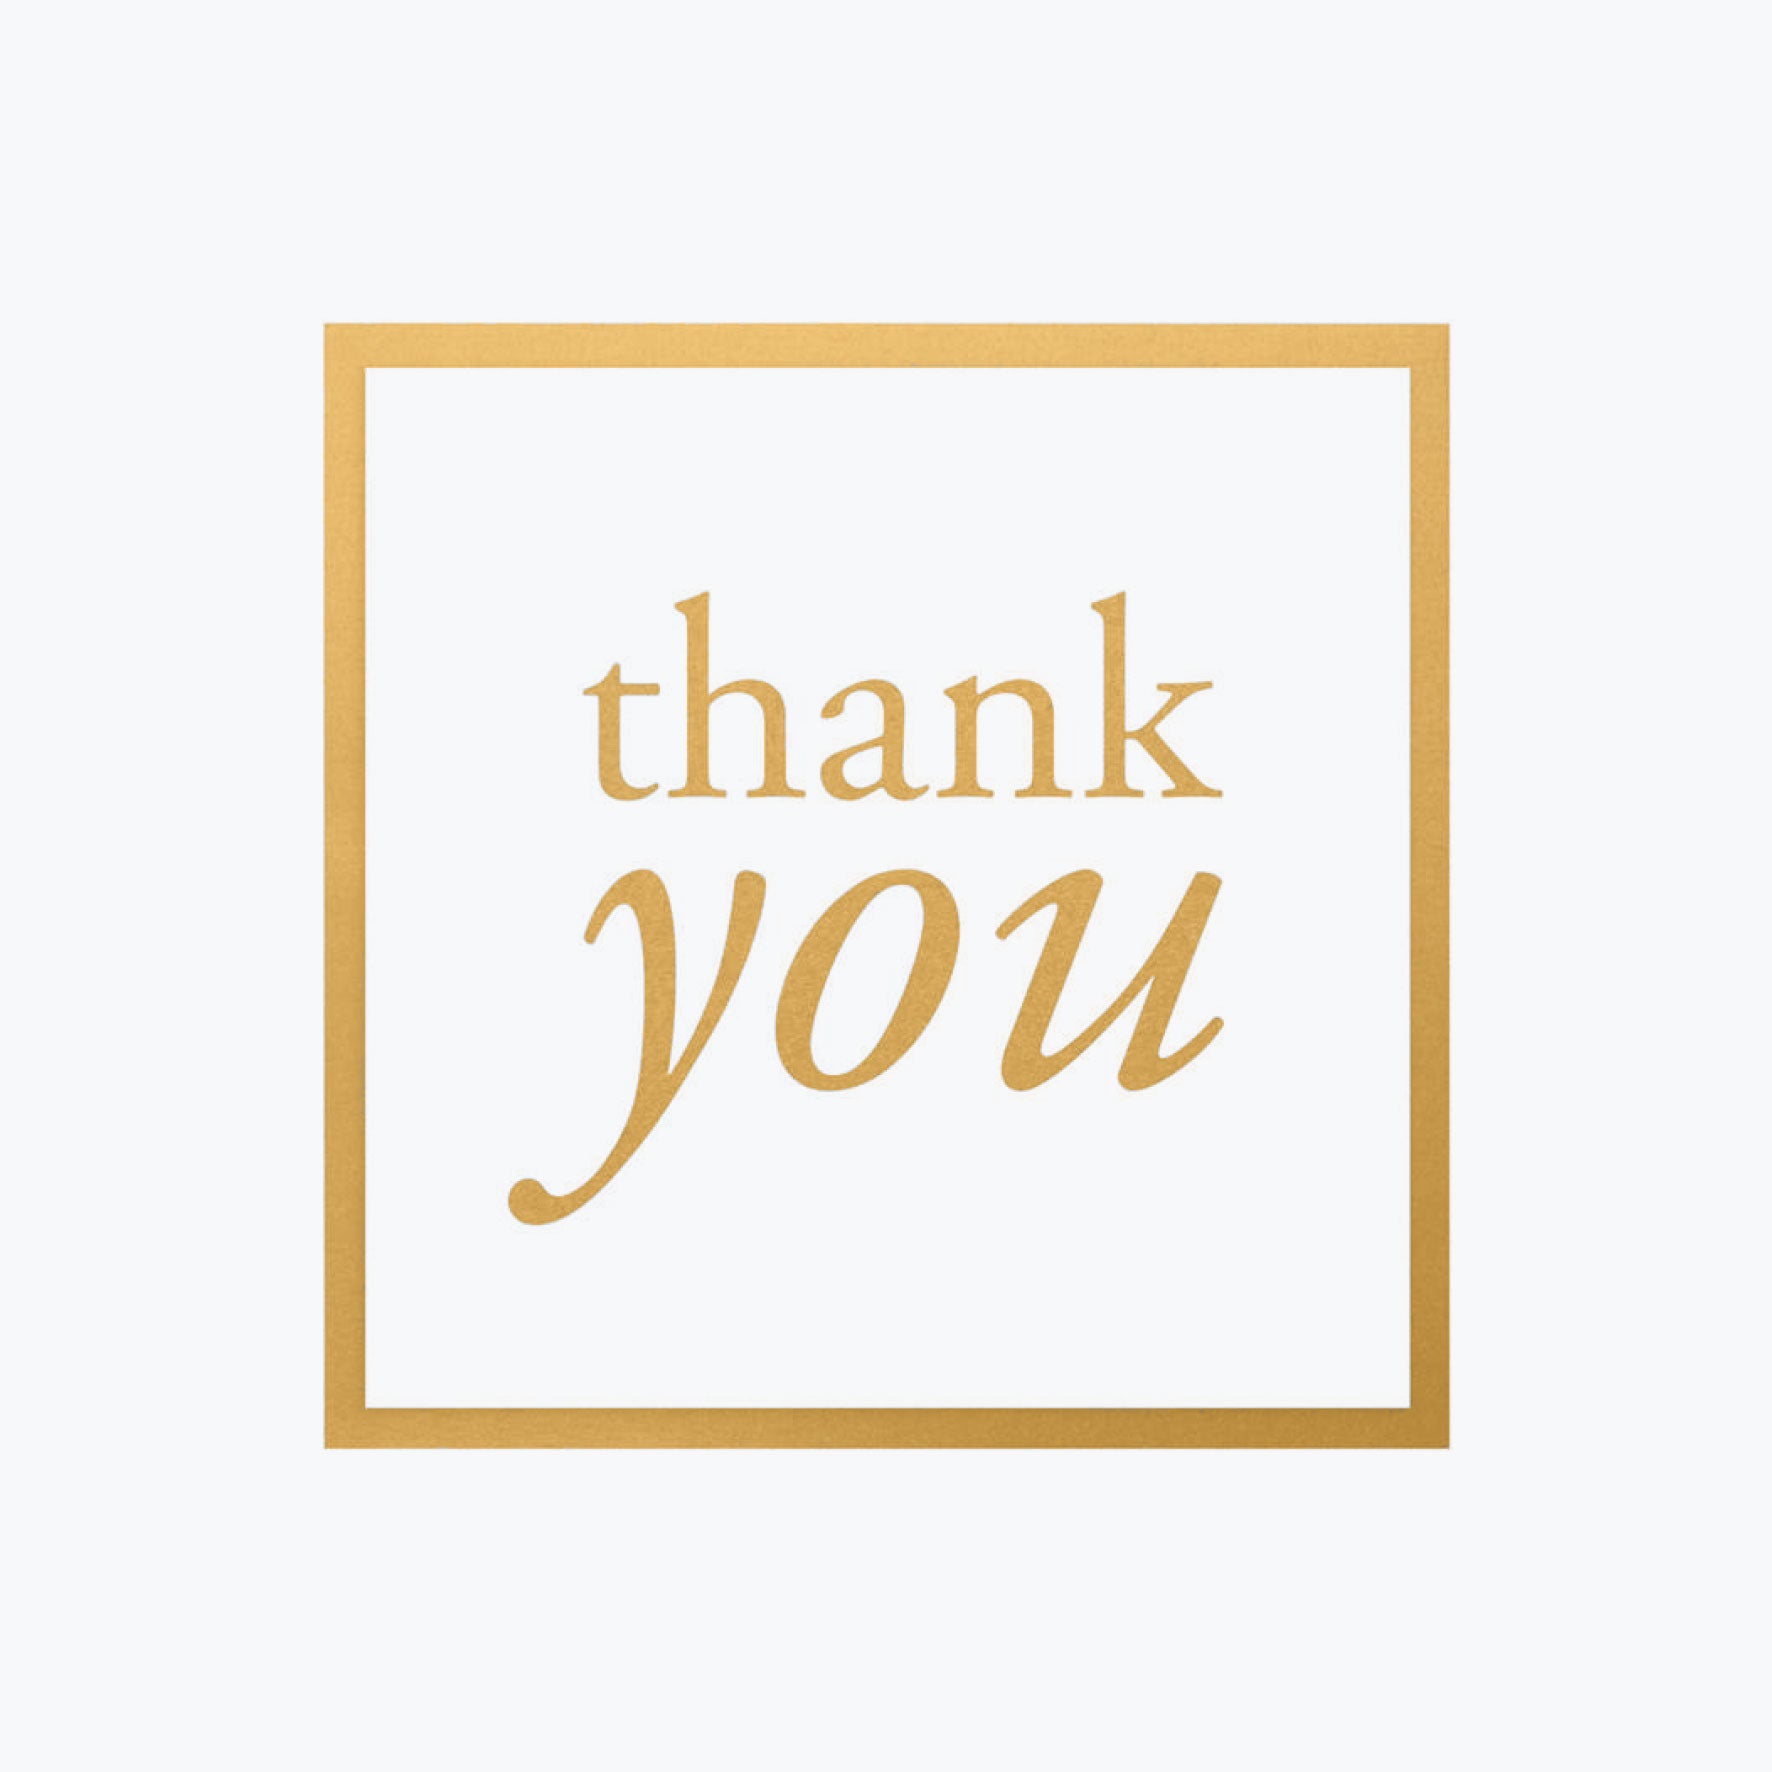 Bookbinders Design - Card- Thank You - Gold <Outgoing>